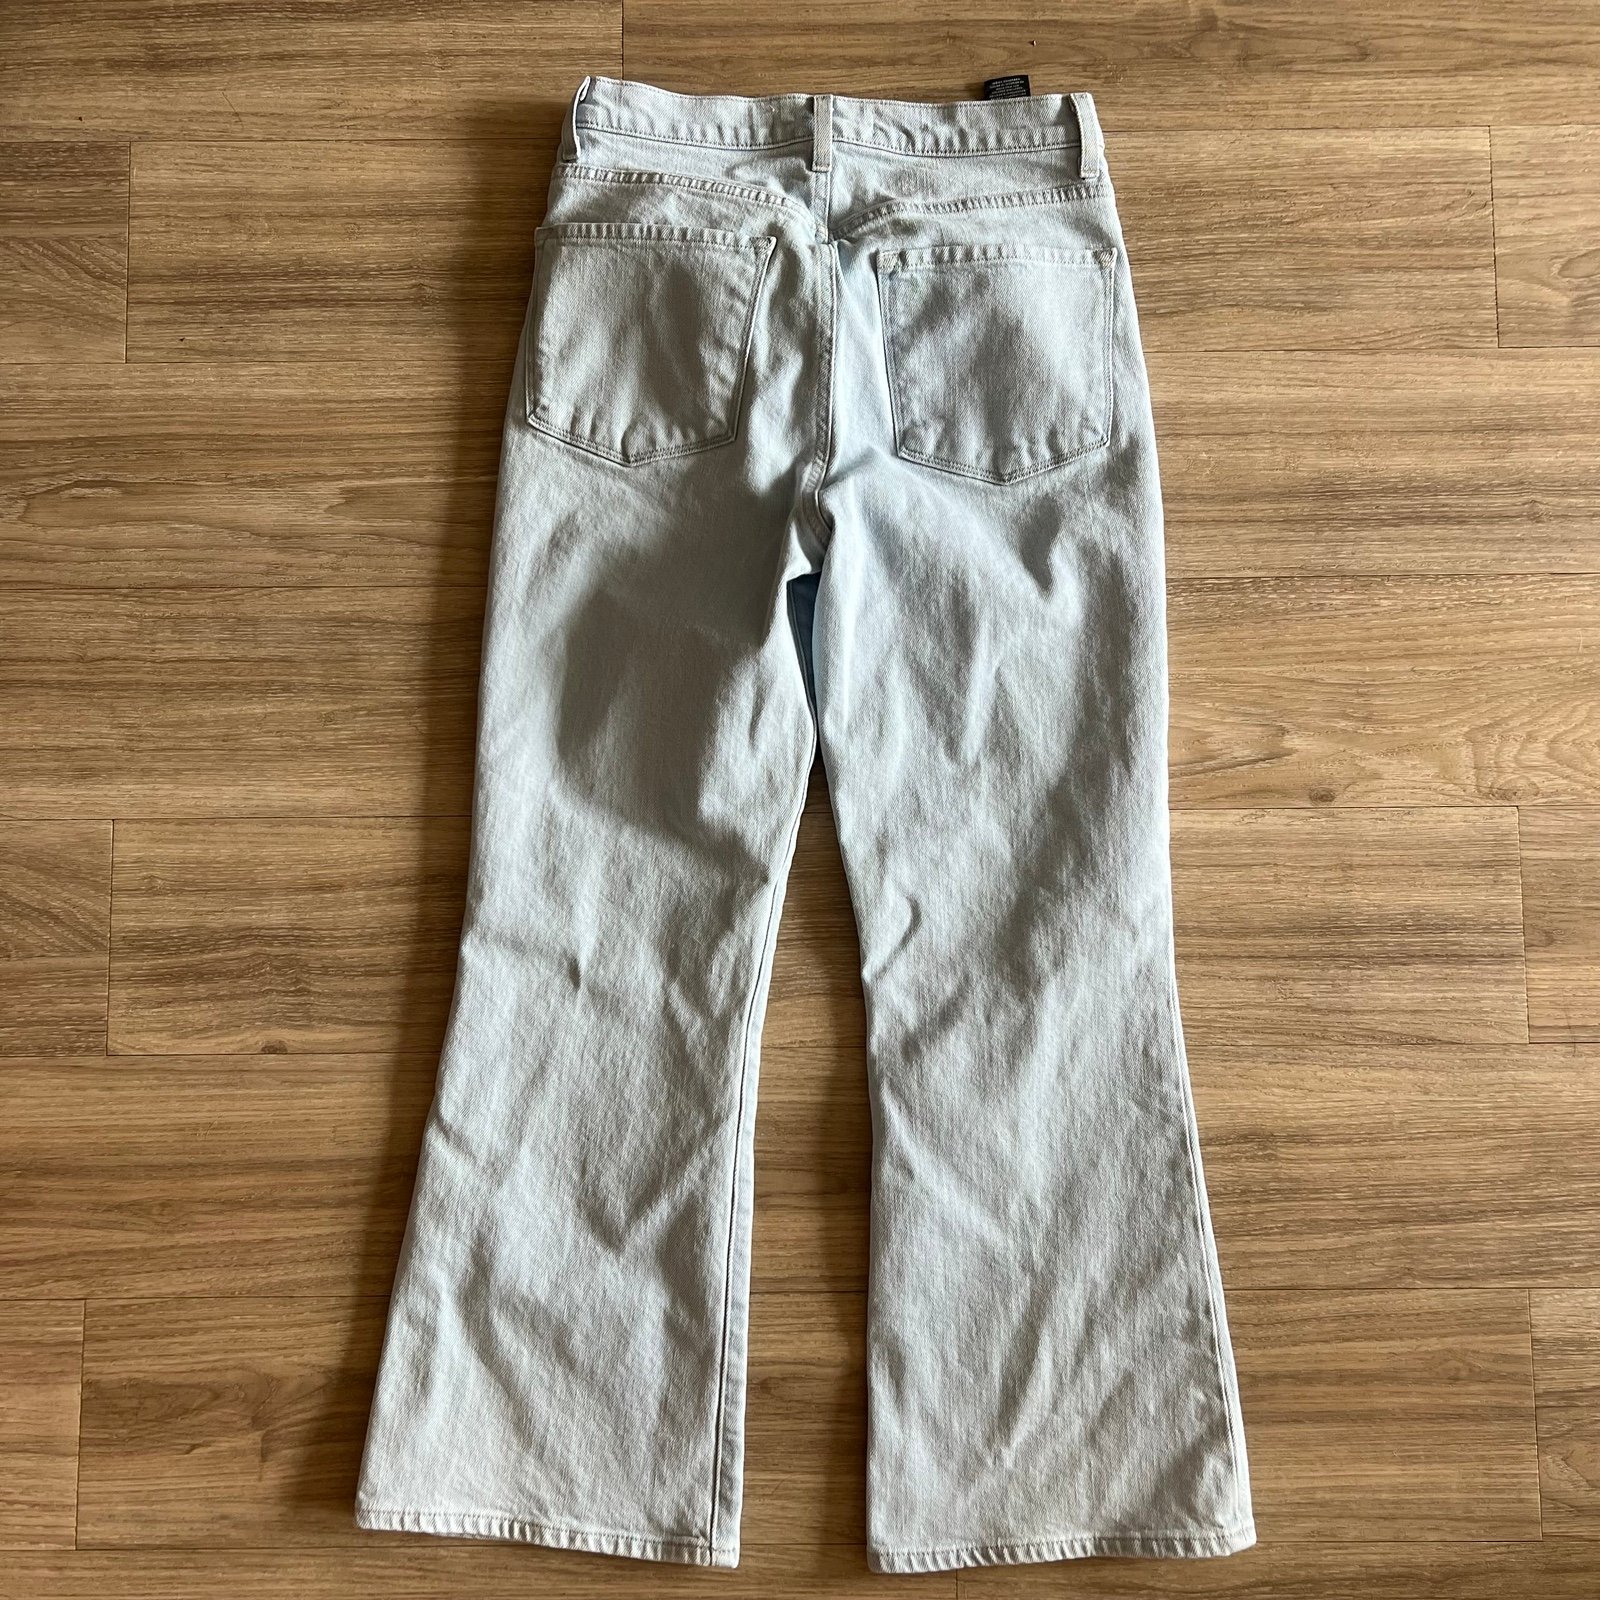 save up to 70% J Brand Jeans | Julia Surf High-Rise Flare Leg Jean | Size 28 lrOoFLezy Buying Cheap